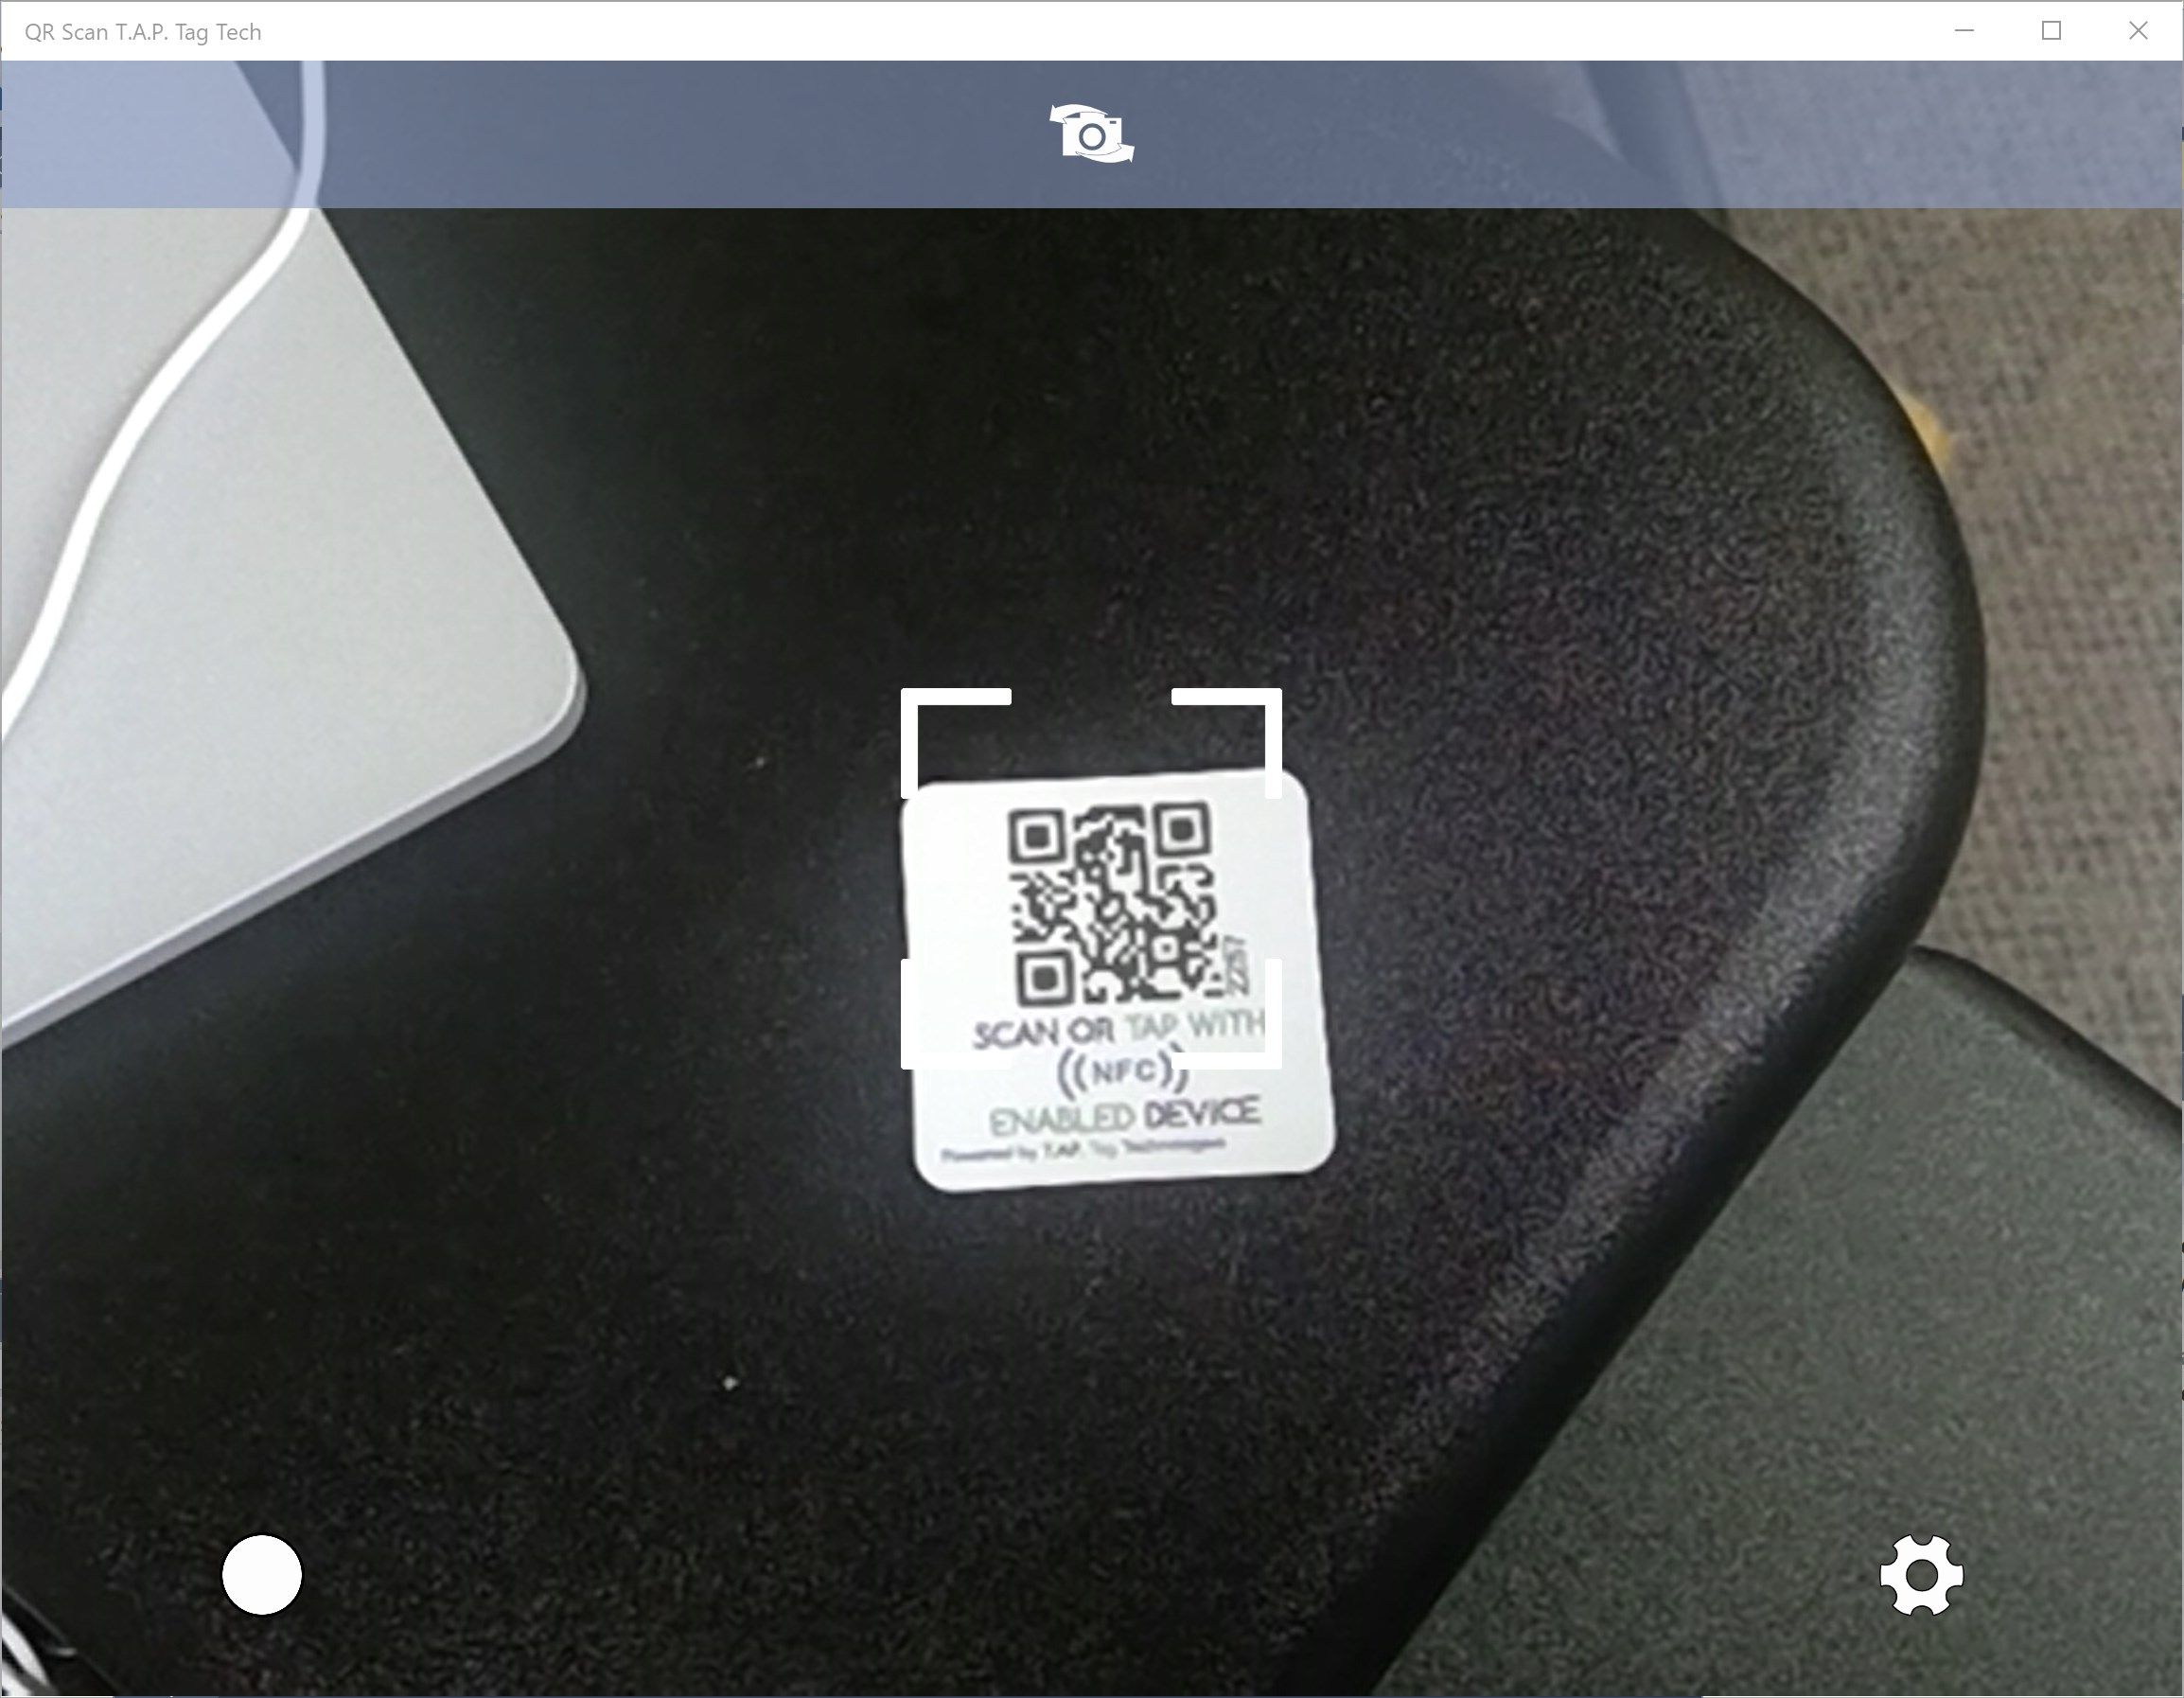 Simply point the aimer at the QR code, and the app will automatically open the content!